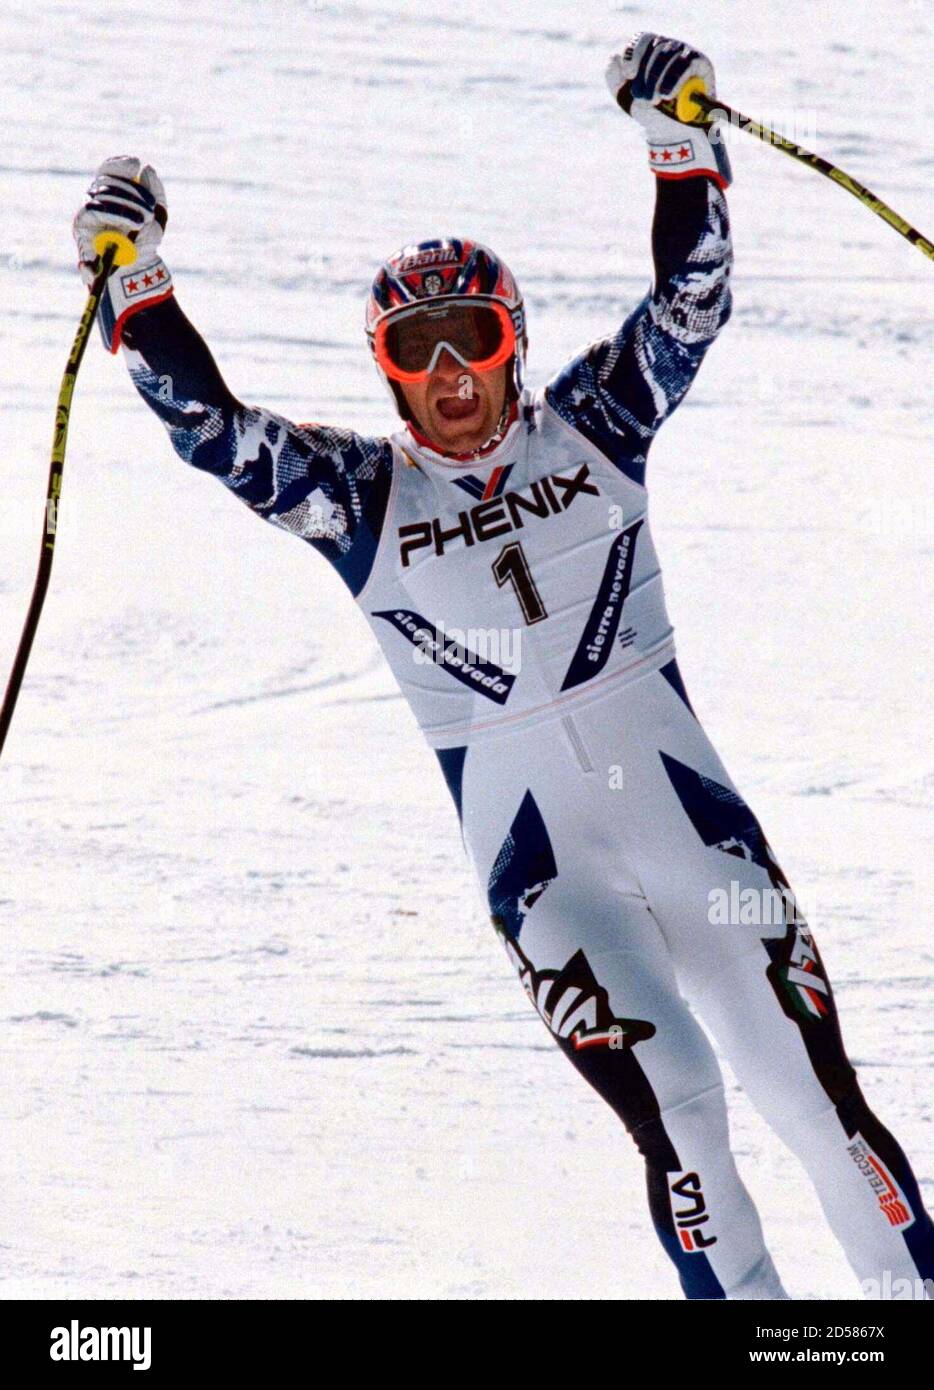 Italian ski king Alberto Tomba celebrates after crossing the finish line to  win the men's giant slalom race in the Alpine skiing world championships  February 23. Tomba, the most succesful Alpine skier